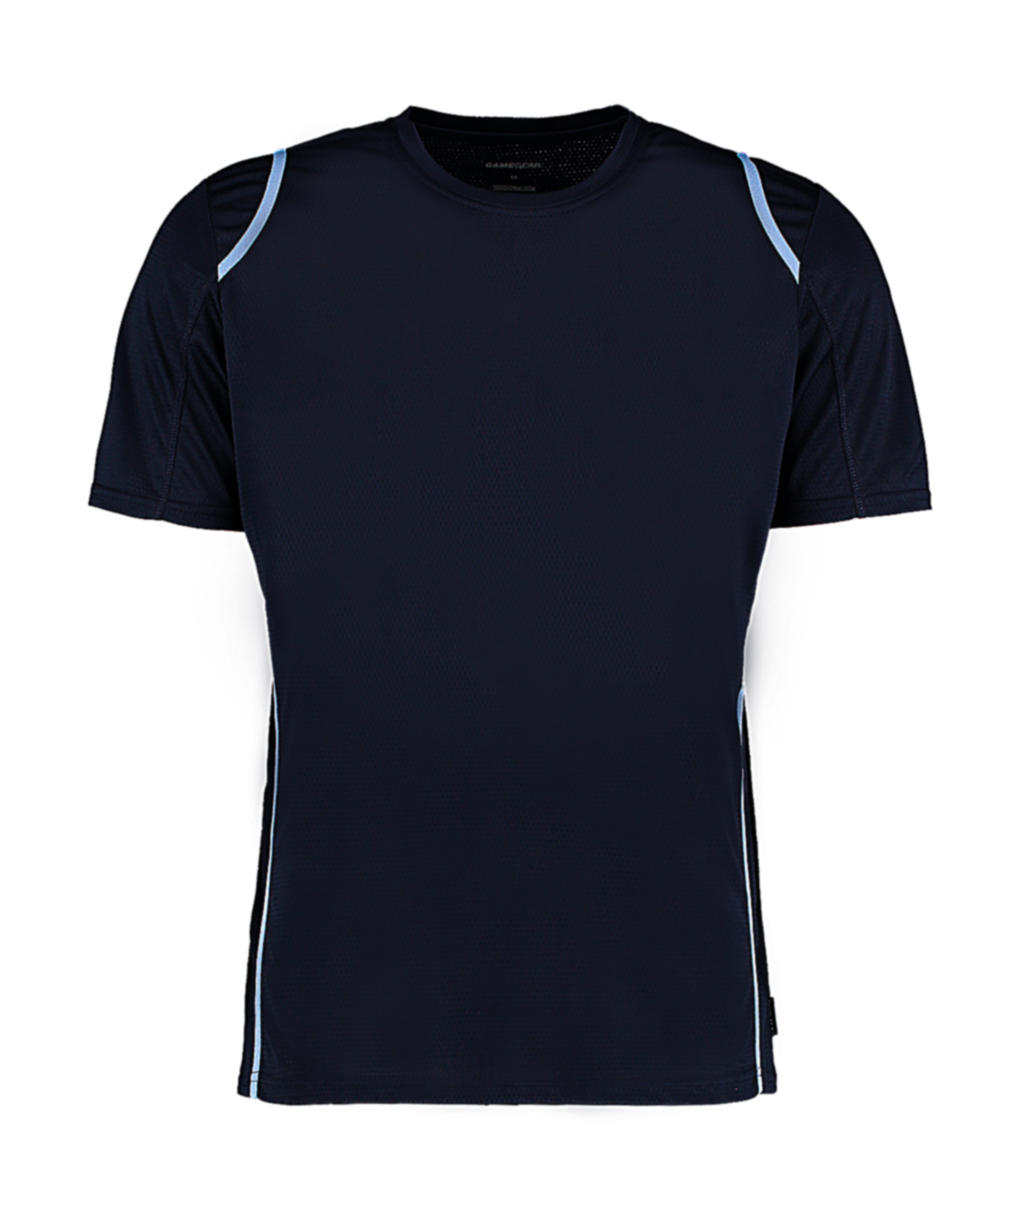  Regular Fit Cooltex? Contrast Tee in Farbe Navy/Light Blue